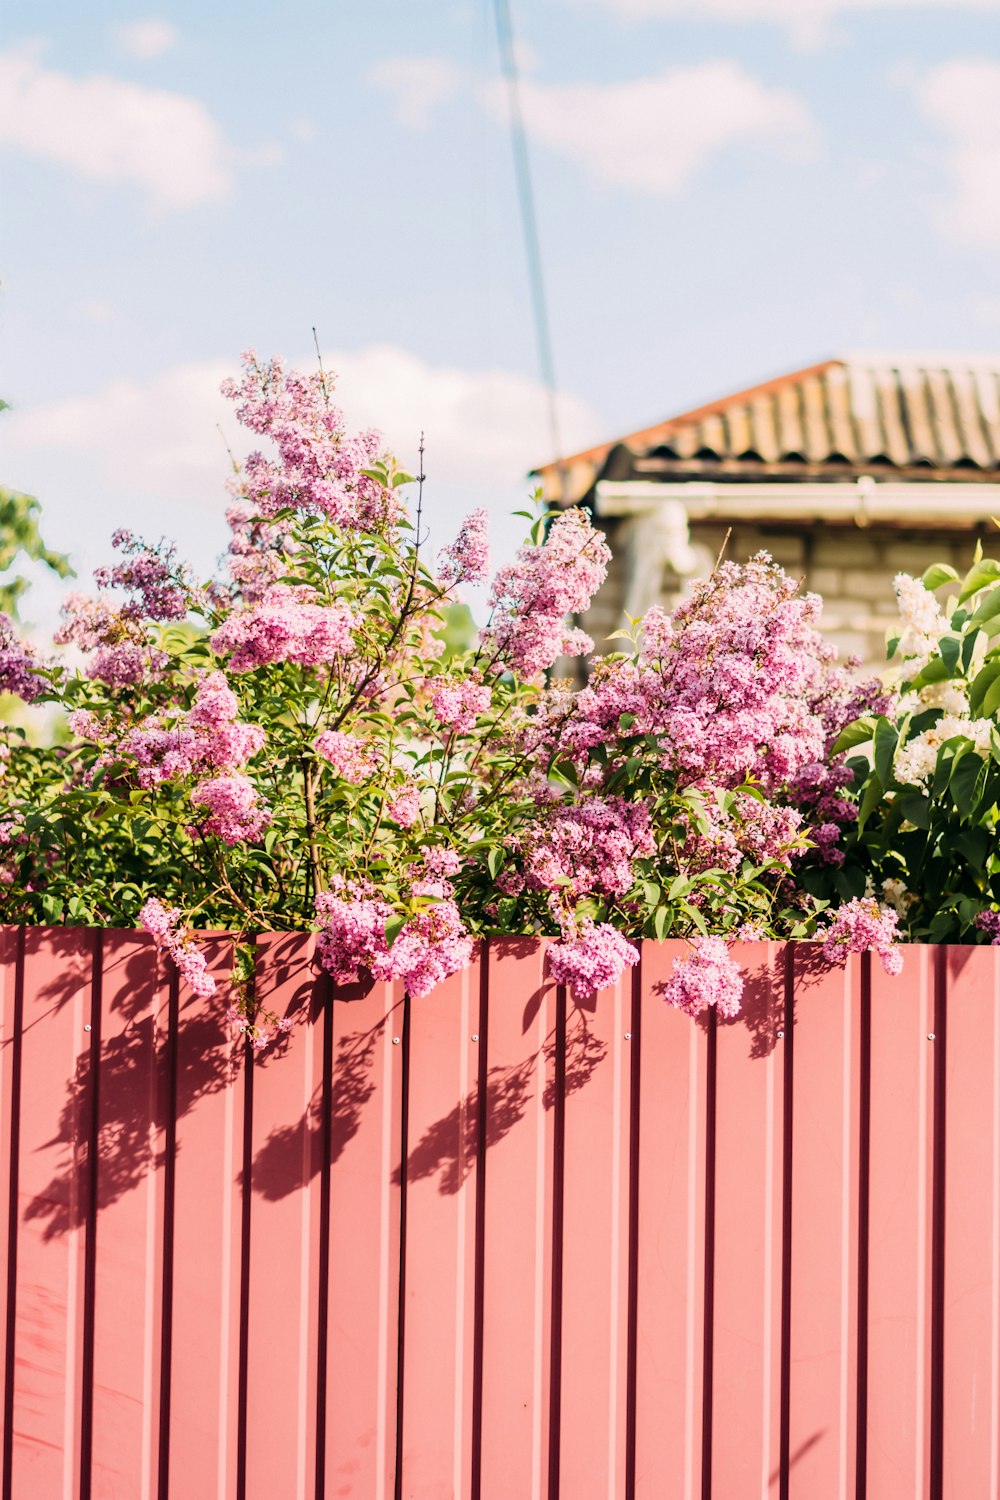 a pink fence with purple flowers growing on it